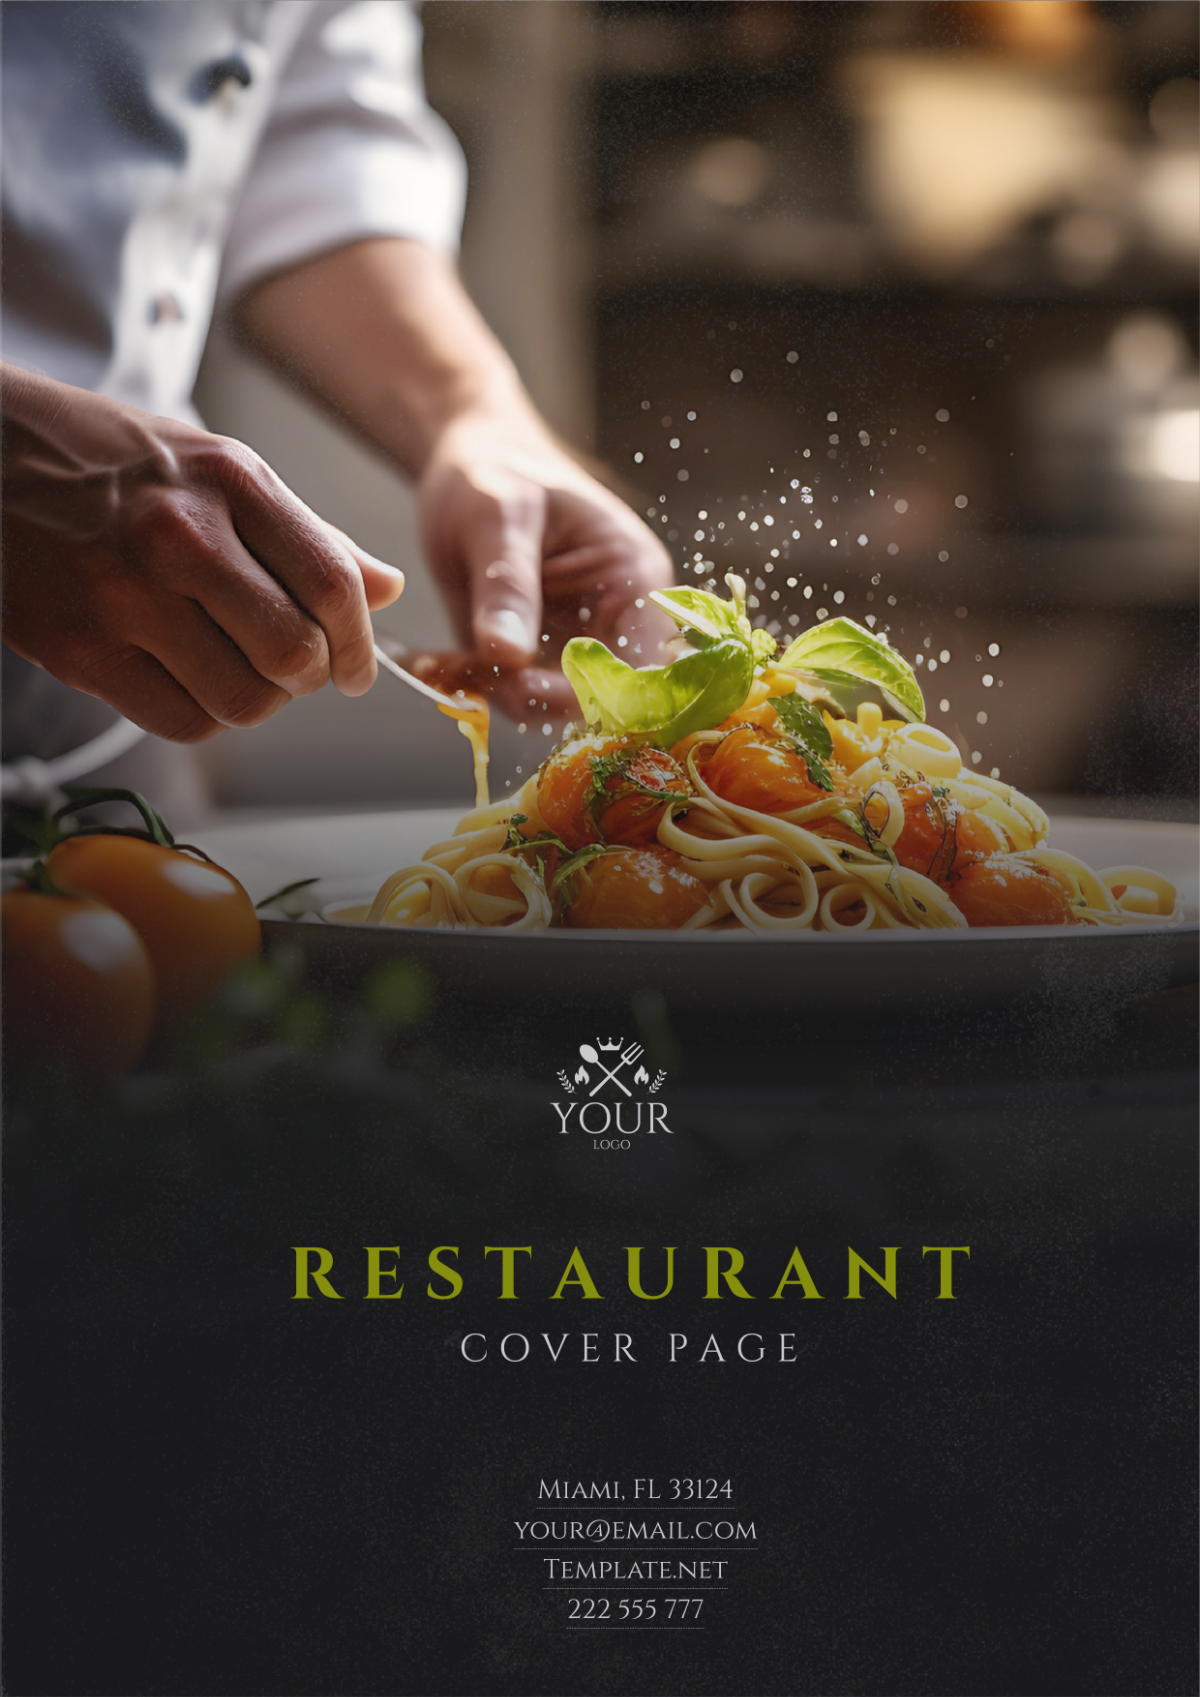 Restaurant Business Cover Page